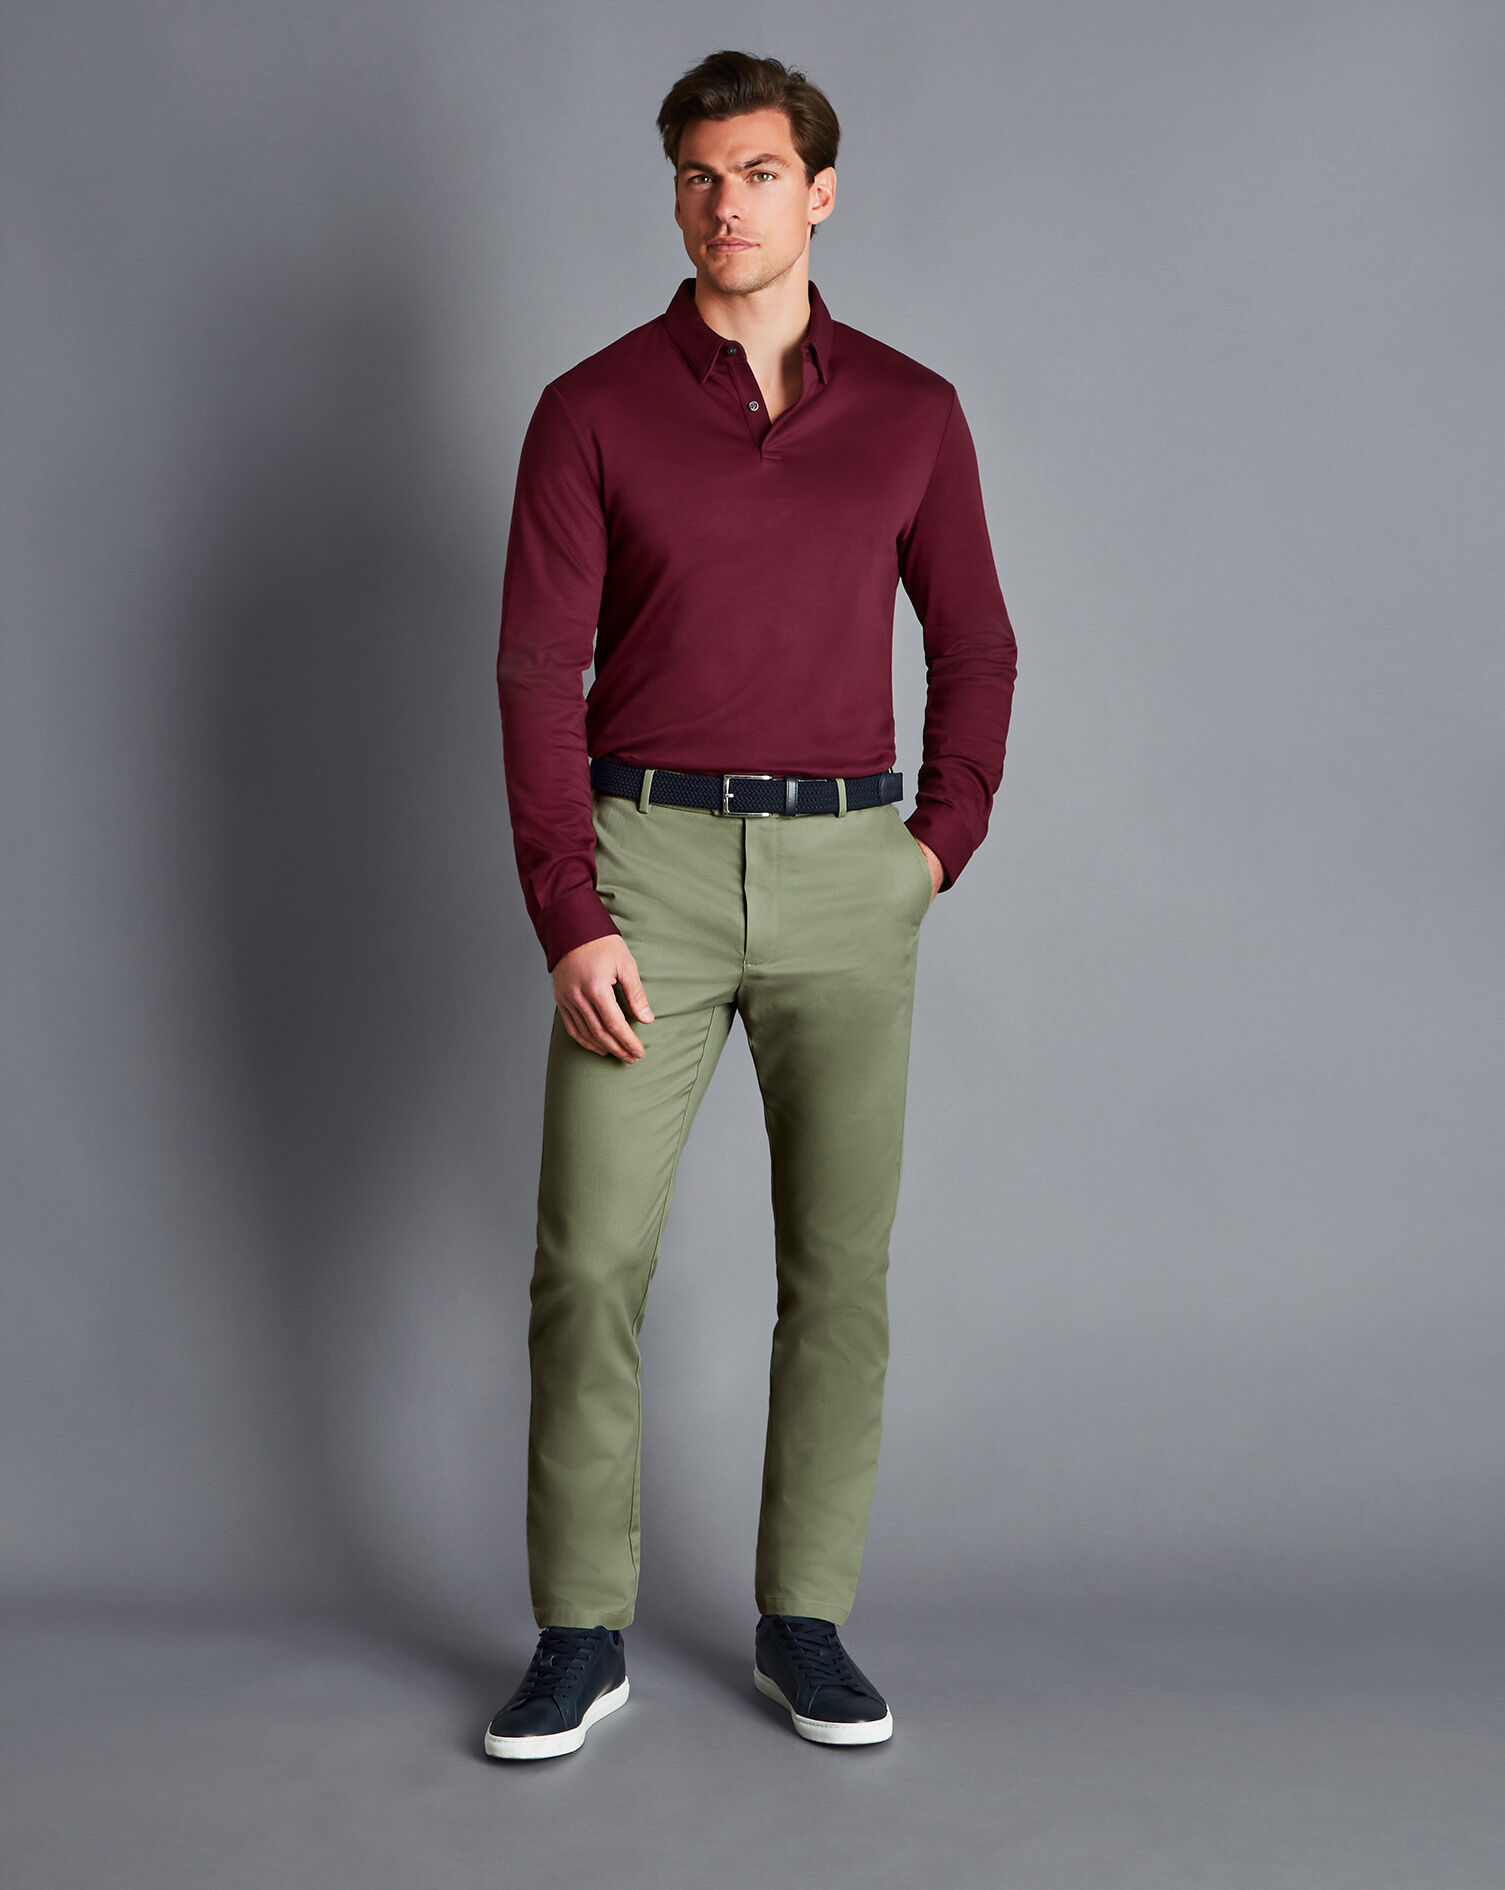 Green Pants Outfits For Men (283 ideas & outfits) | Lookastic